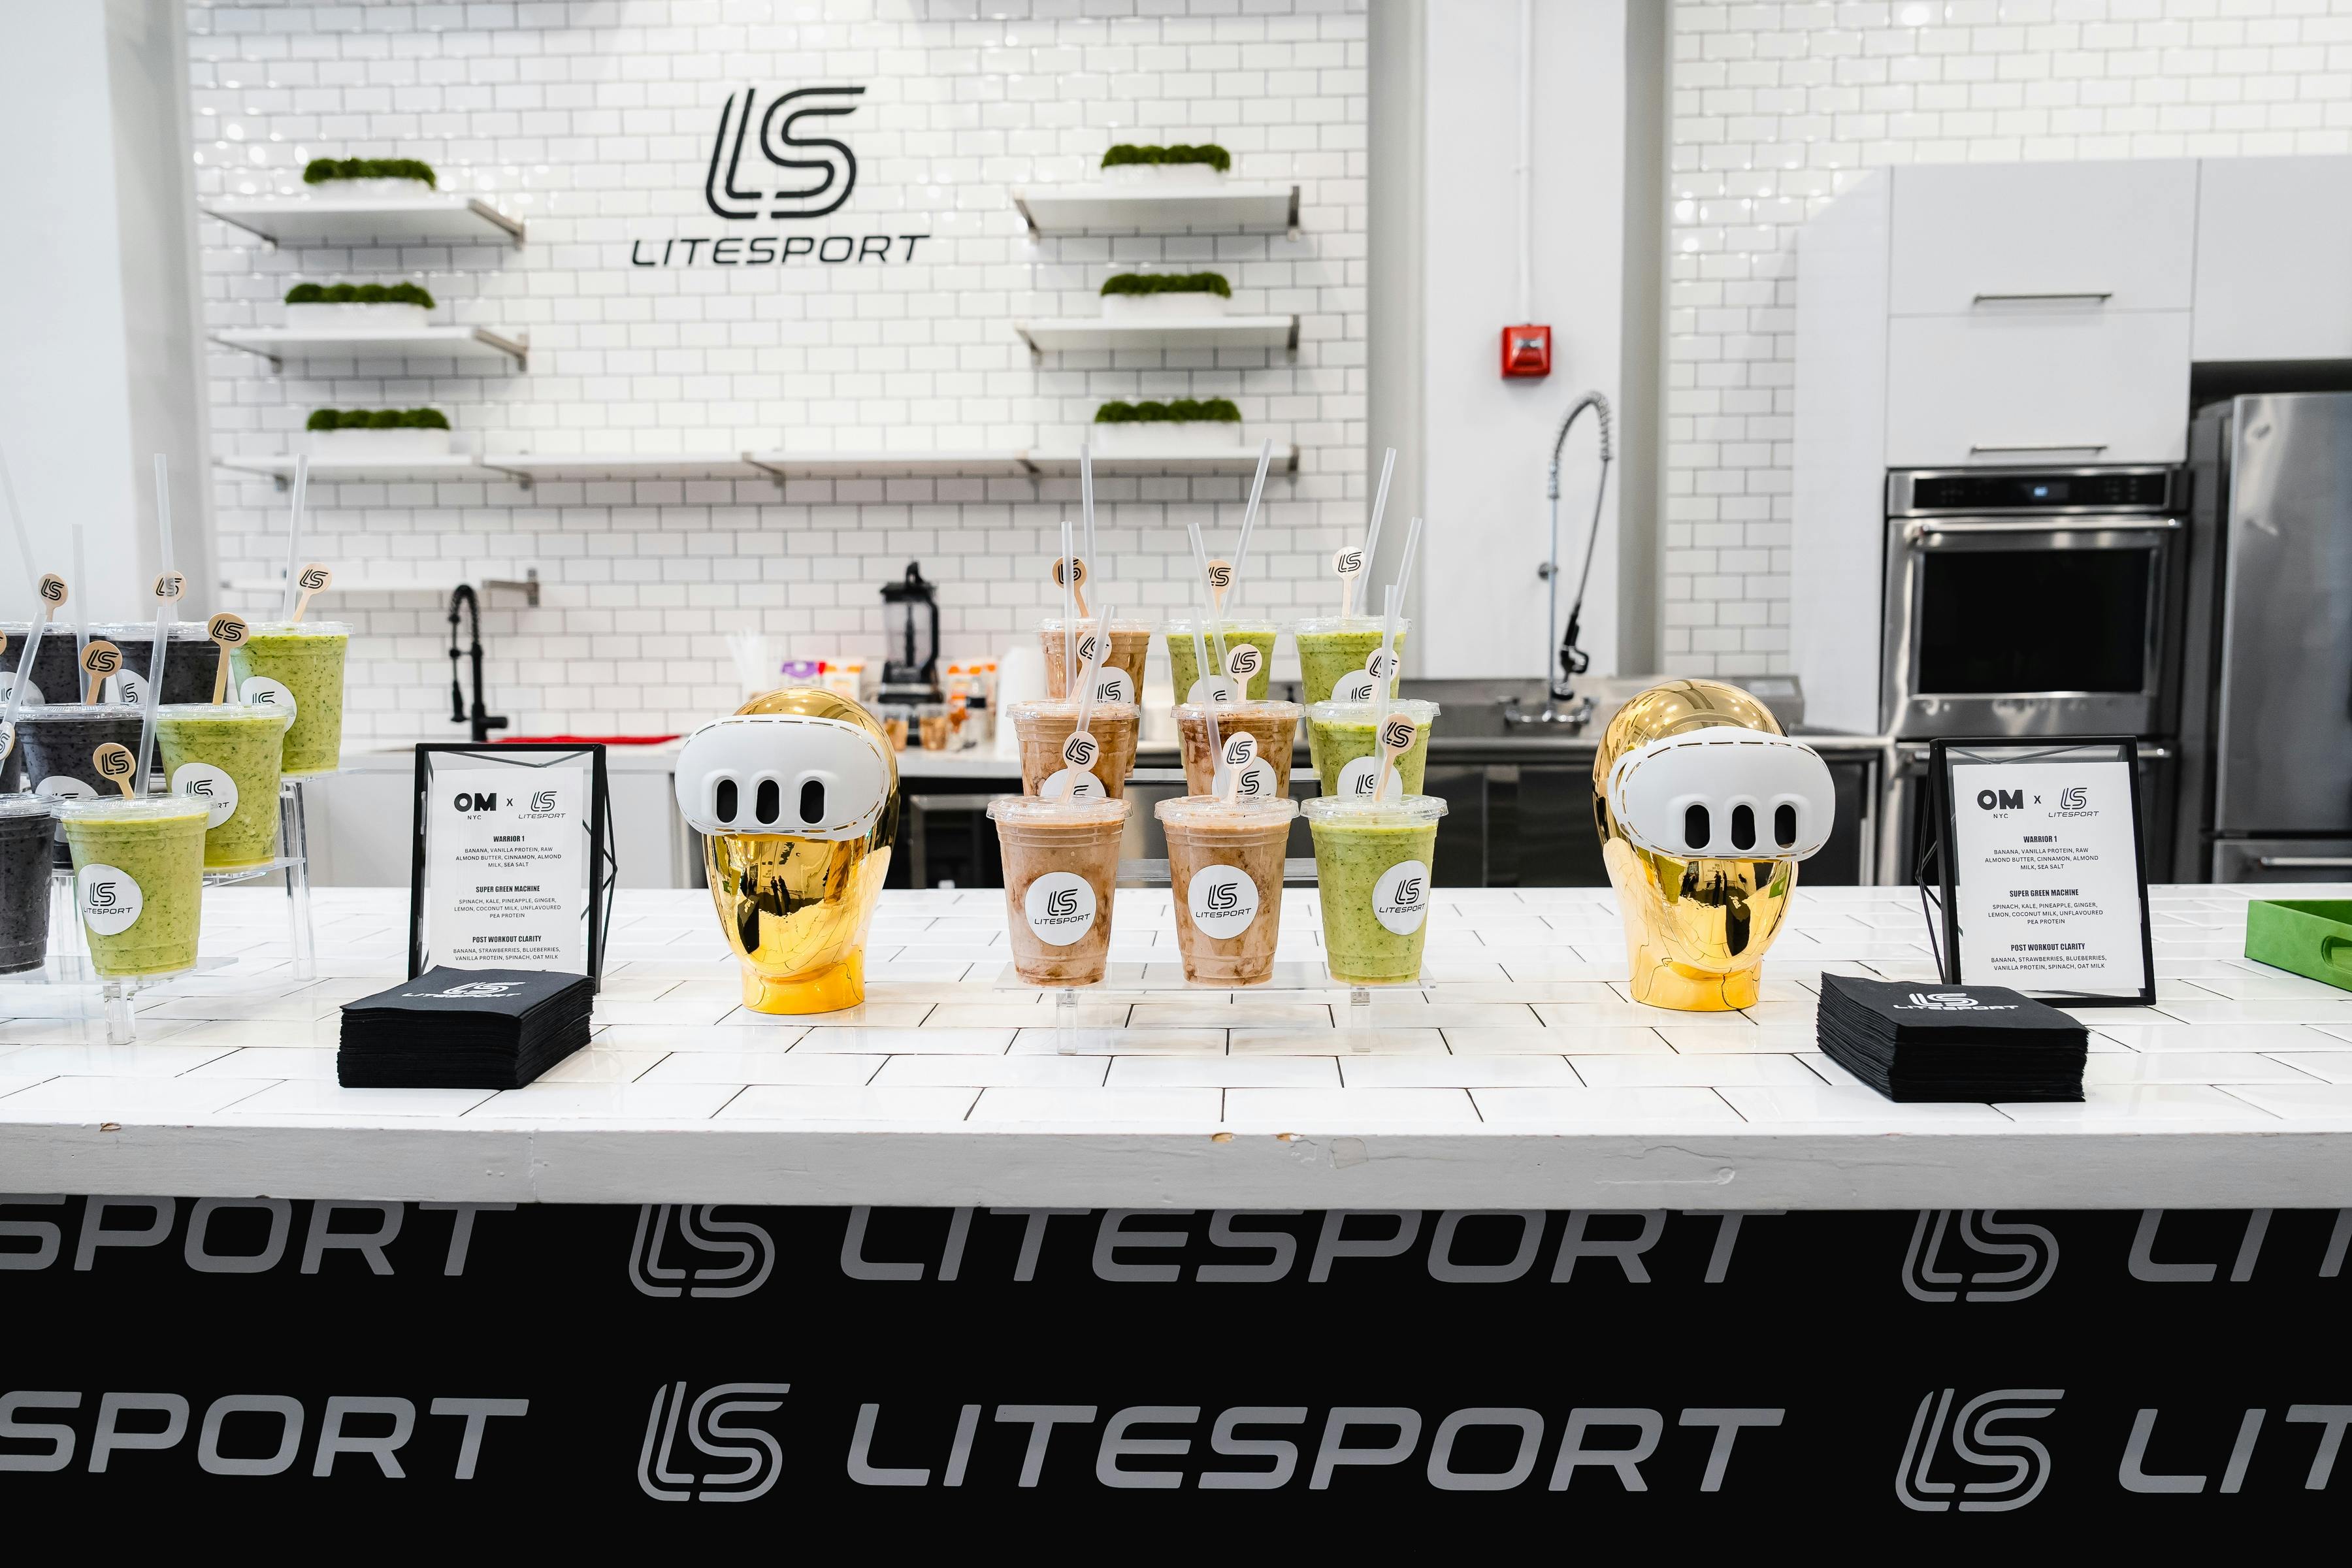 Interior view of the LiteSport smoothie bar featuring a variety of green and brown smoothies in clear cups with lids and straws, displayed on a white tiled counter. Prominently placed are two gold trophies and a black sign reading 'OM x LS. LiteSport x Omni Smiles'. The backdrop is a white, clean kitchen space with a logo of LiteSport on the wall.